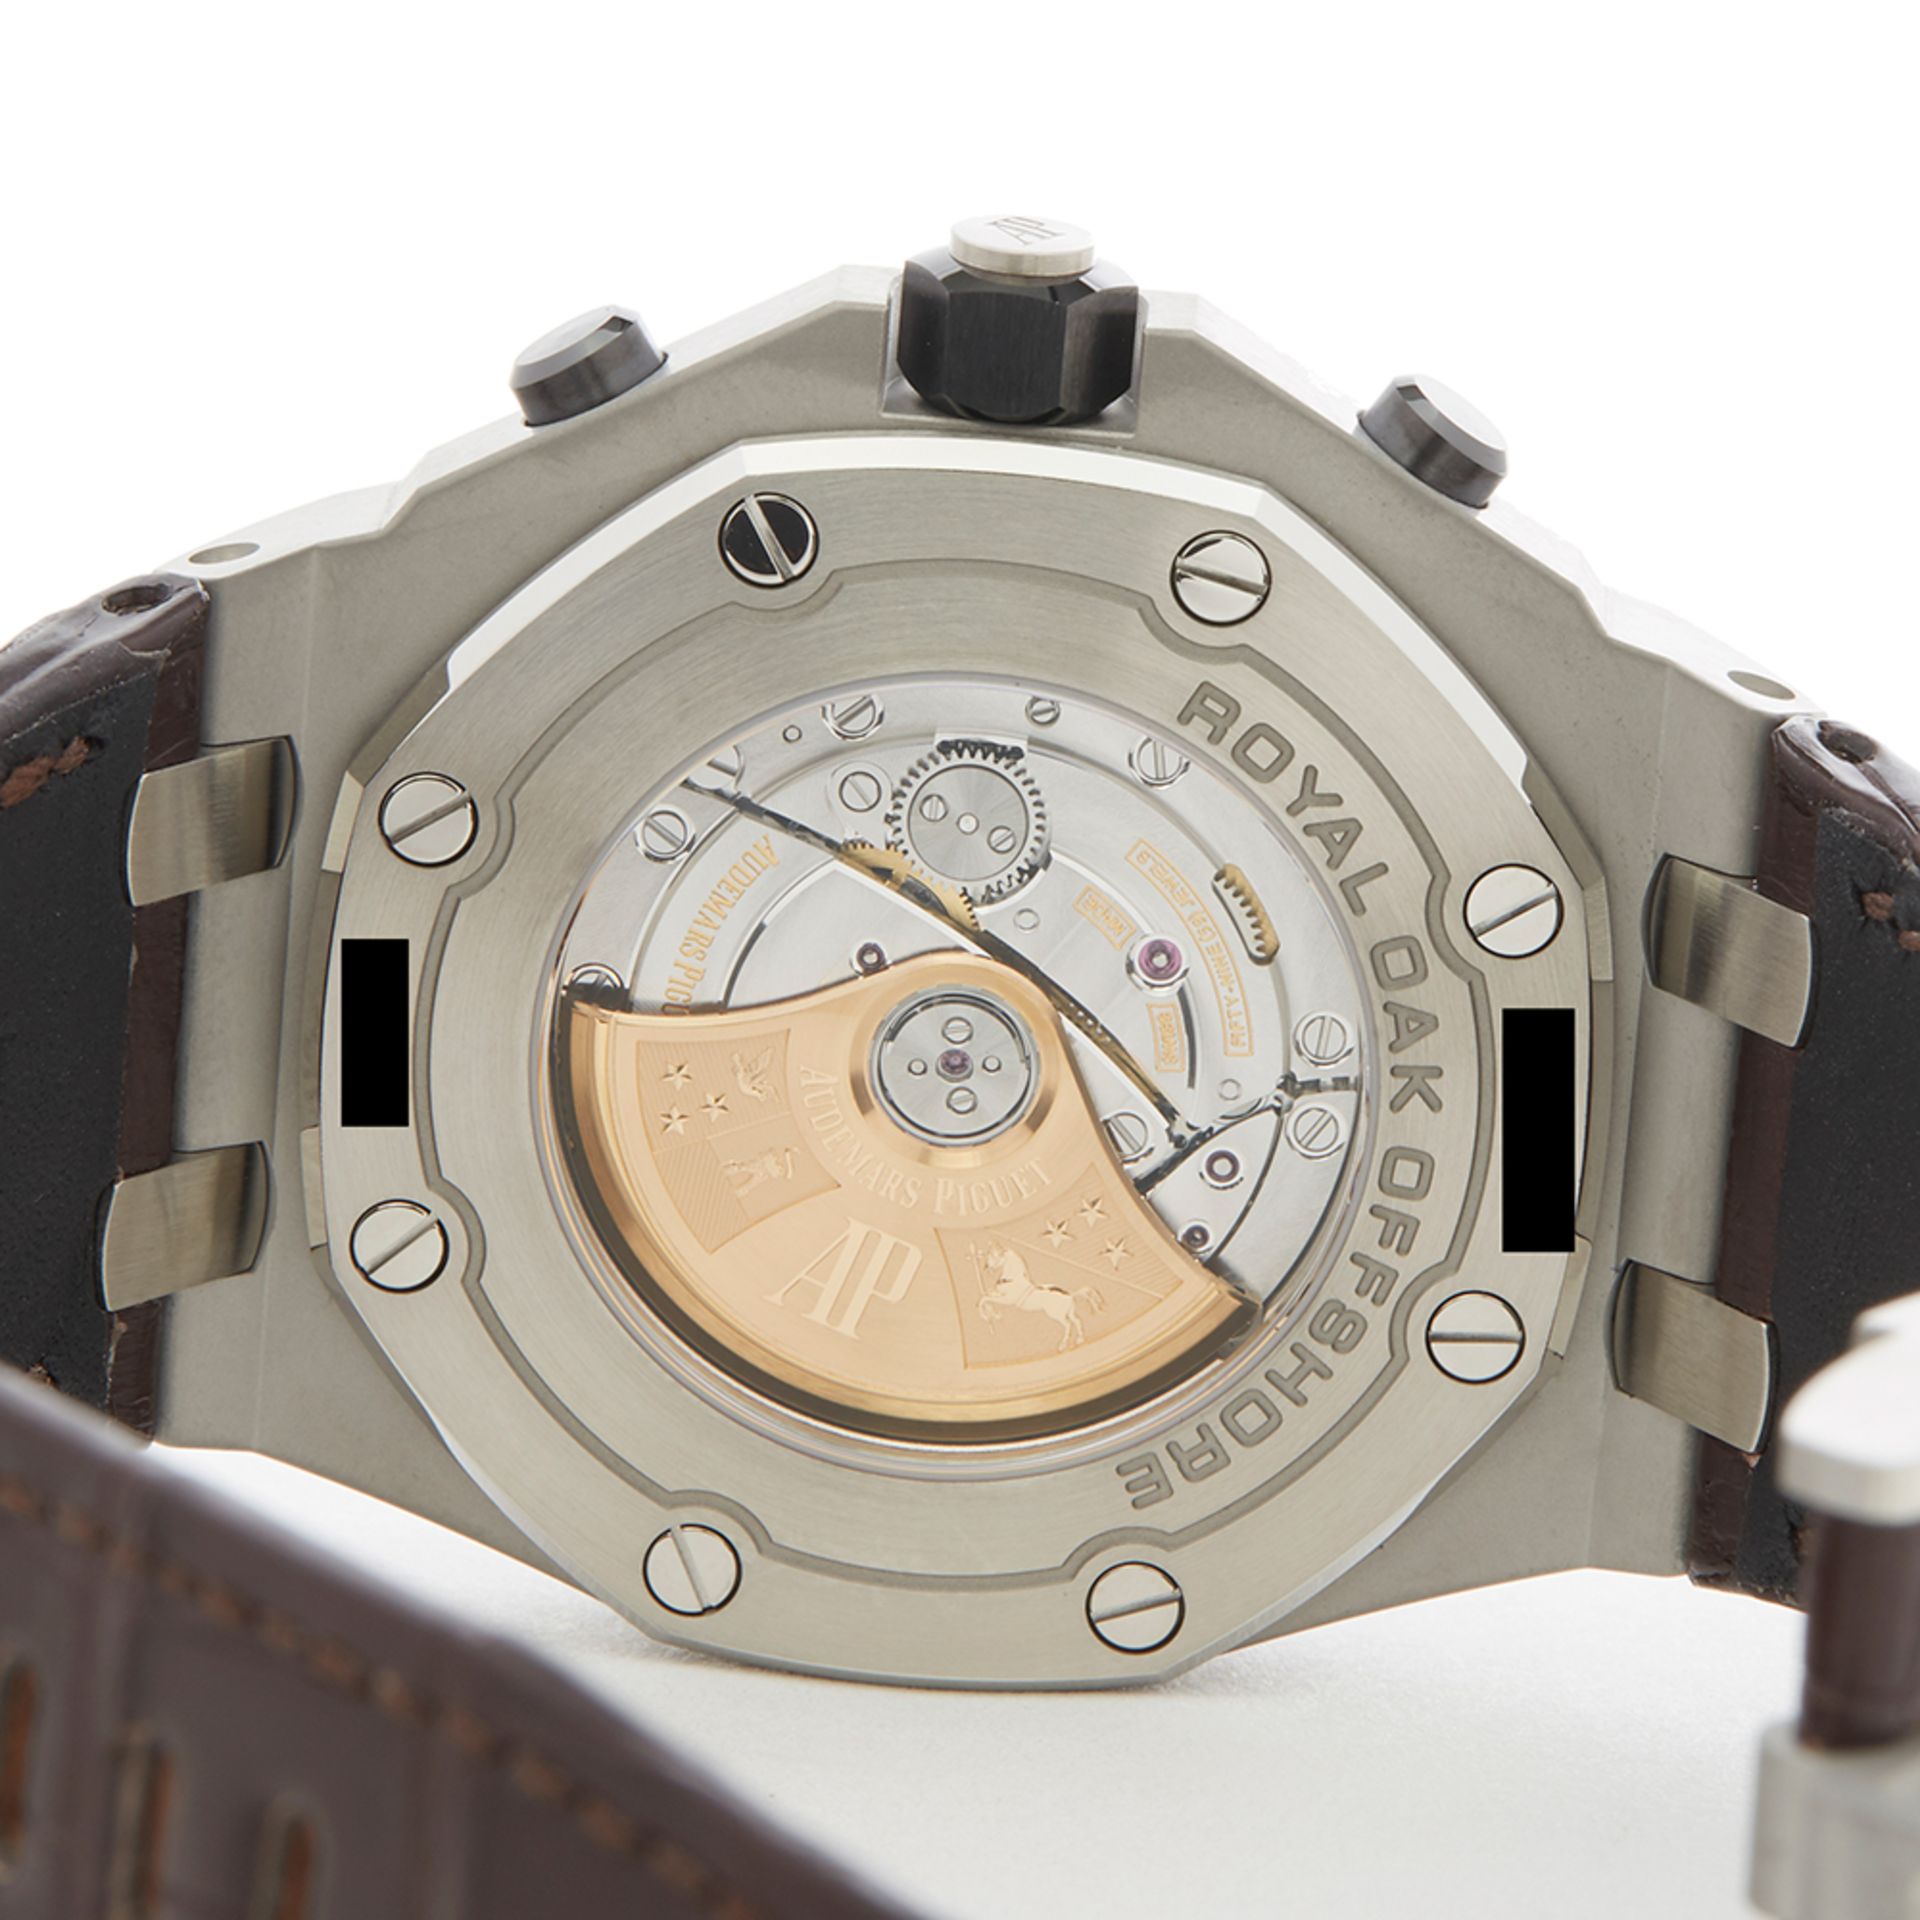 Audemars Piguet Royal Oak Offshore Stainless Steel - 26470ST.OO.A820CR.01 - Image 7 of 7